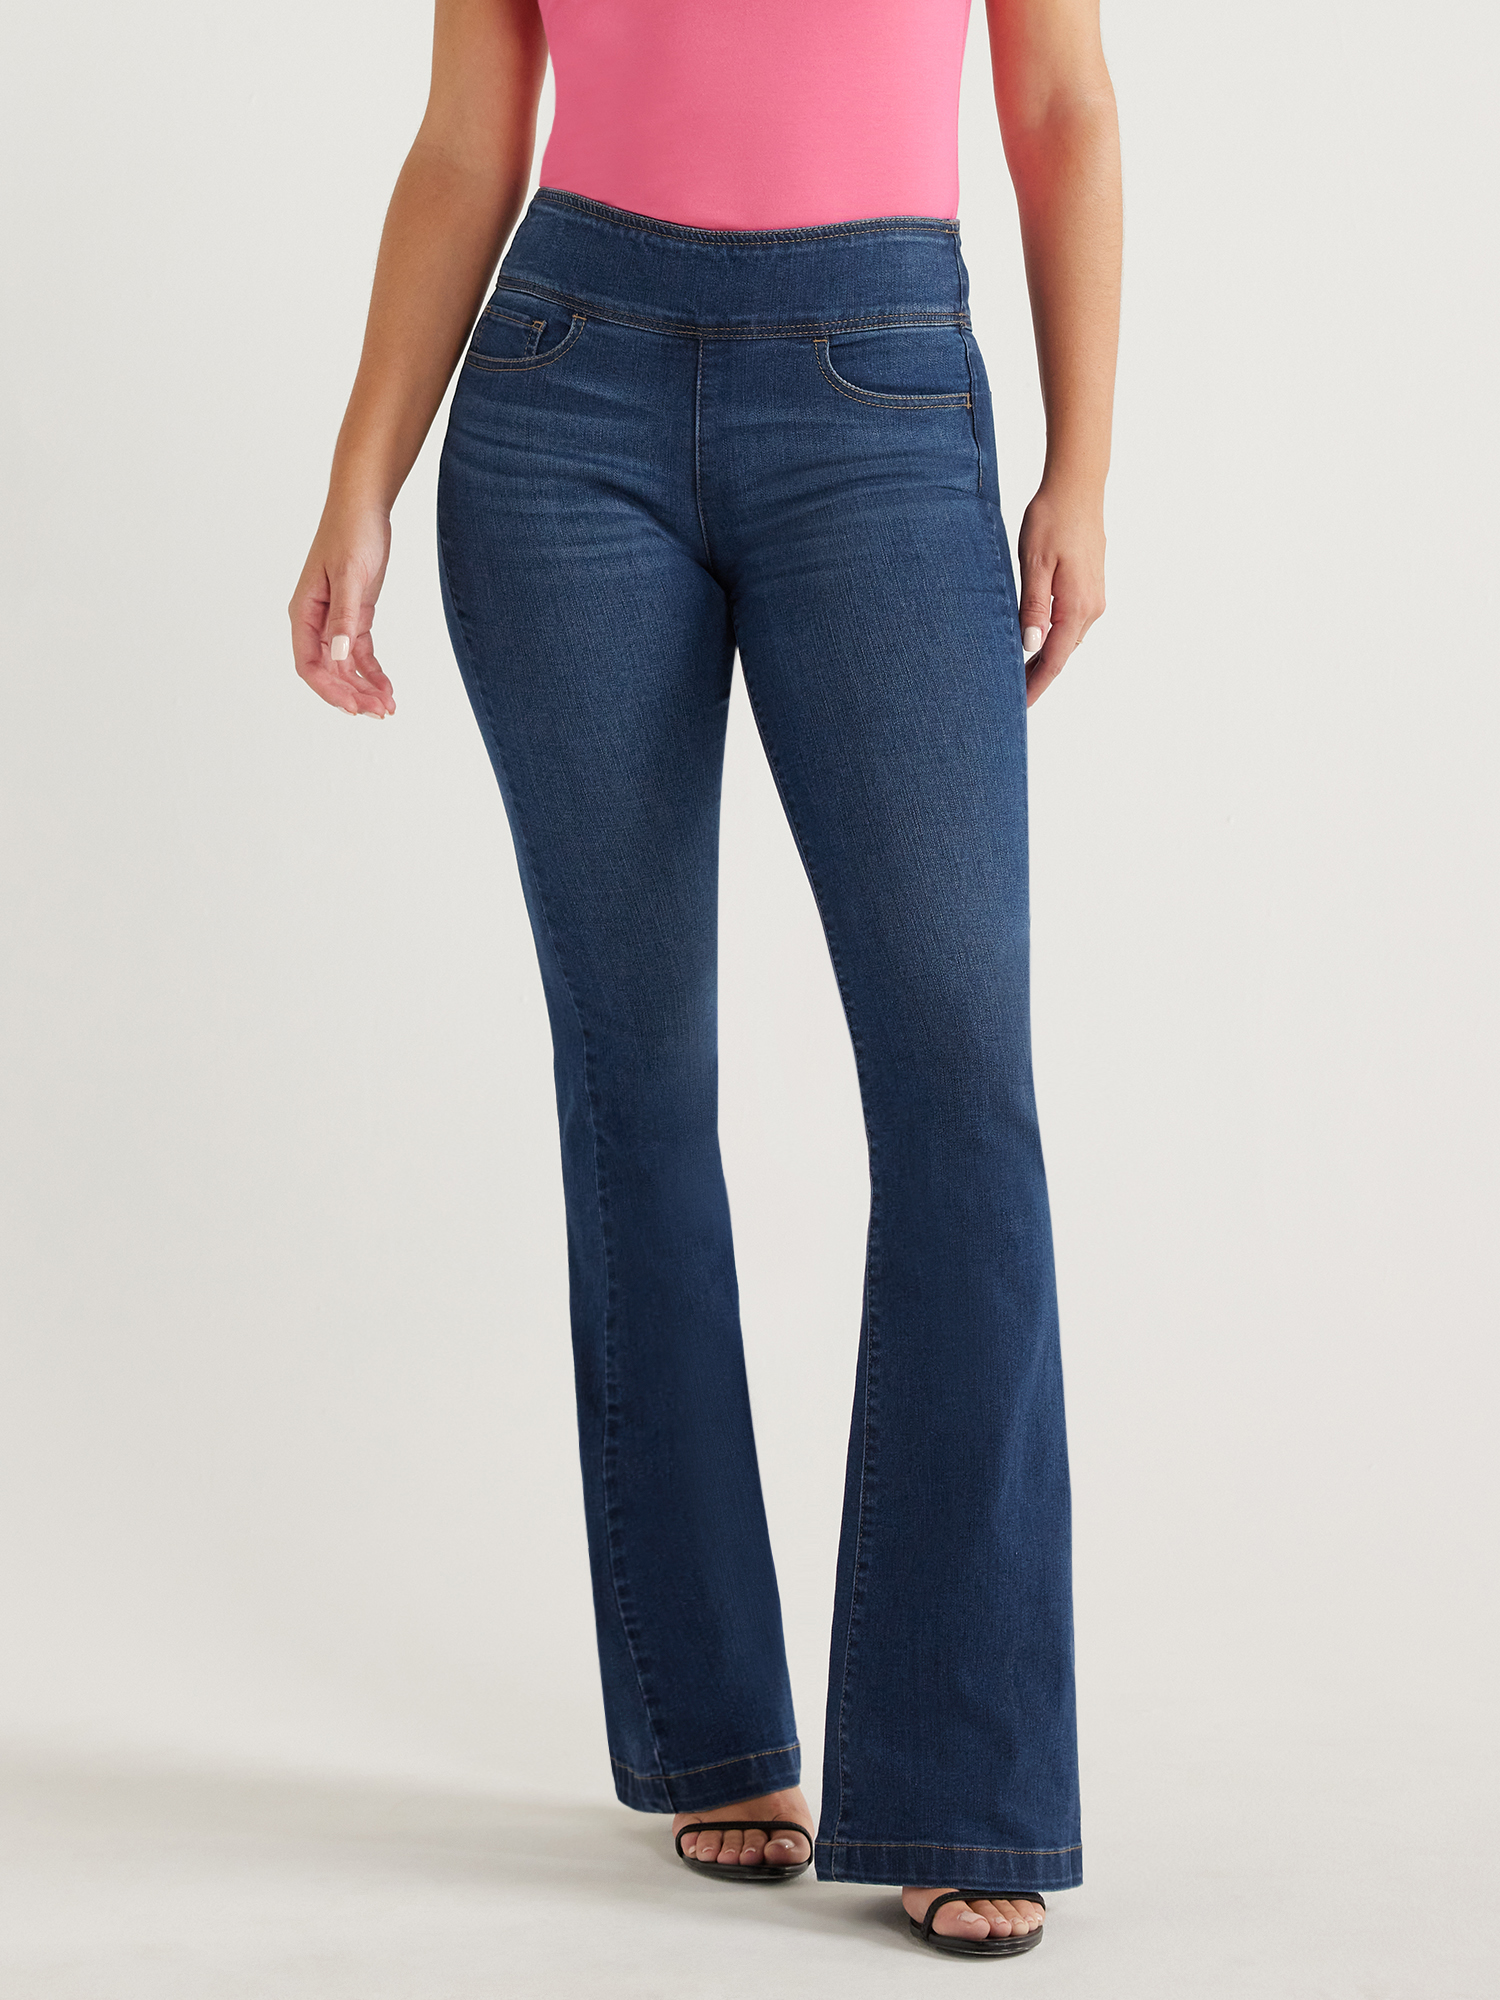 Sofia Jeans Women's Melissa Flare Pull On High Rise Jeans, 33.5" Inseam, Sizes 2-20